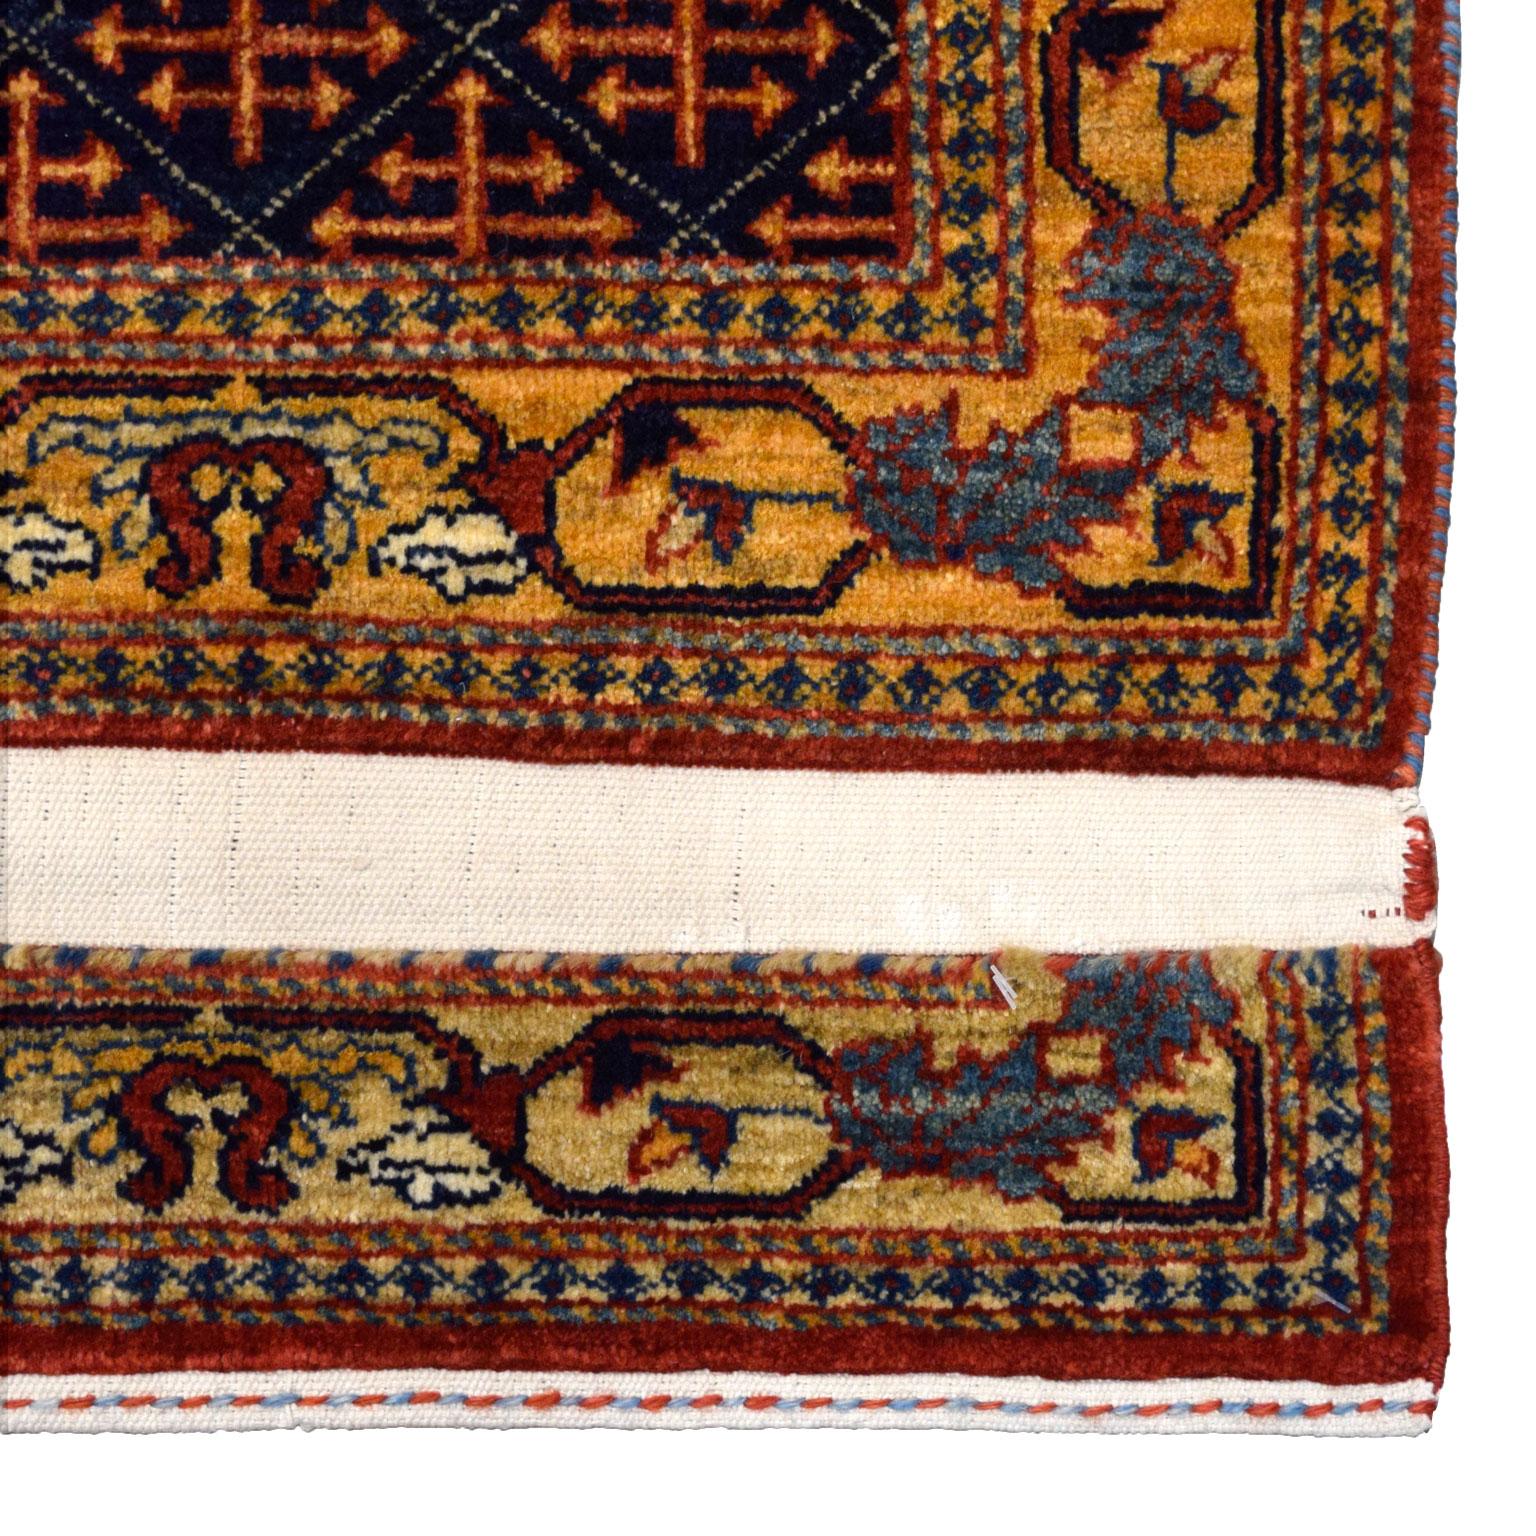 Vegetable Dyed Qashqai Tribal Persian Rug in Indigo, Gold, Red, and Cream Wool, 4' x 6' For Sale